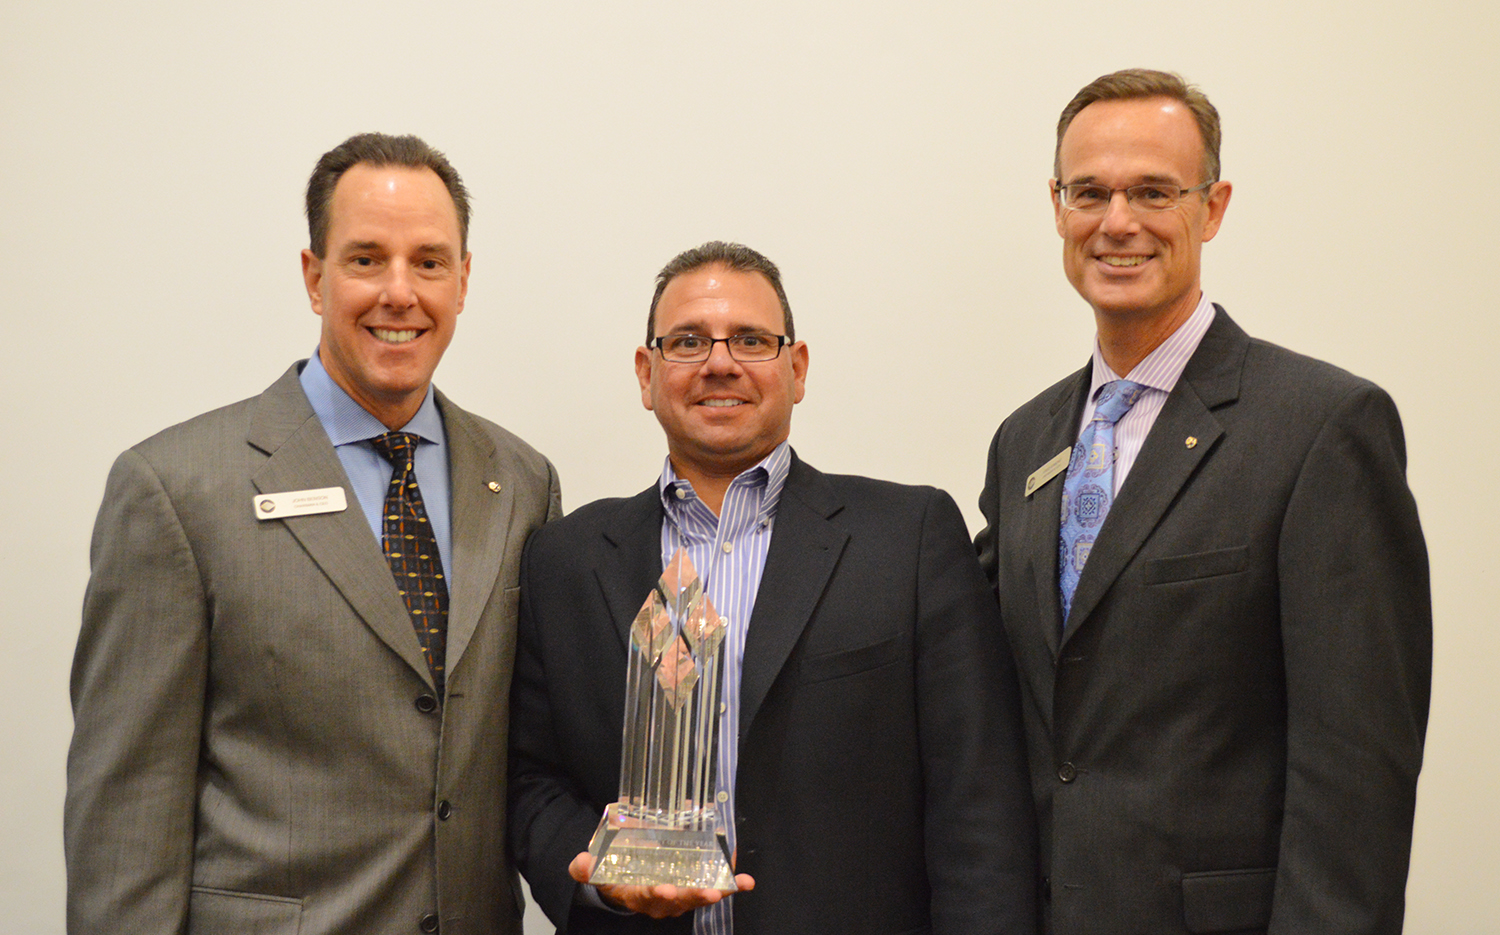 Frankenmuth Insurance Chairman & CEO John S. Benson (left) and President and COO Fred Edmond (right) present the company's 2013 Agency of the Year award to HBL Insurance Principal Mark Hatz.